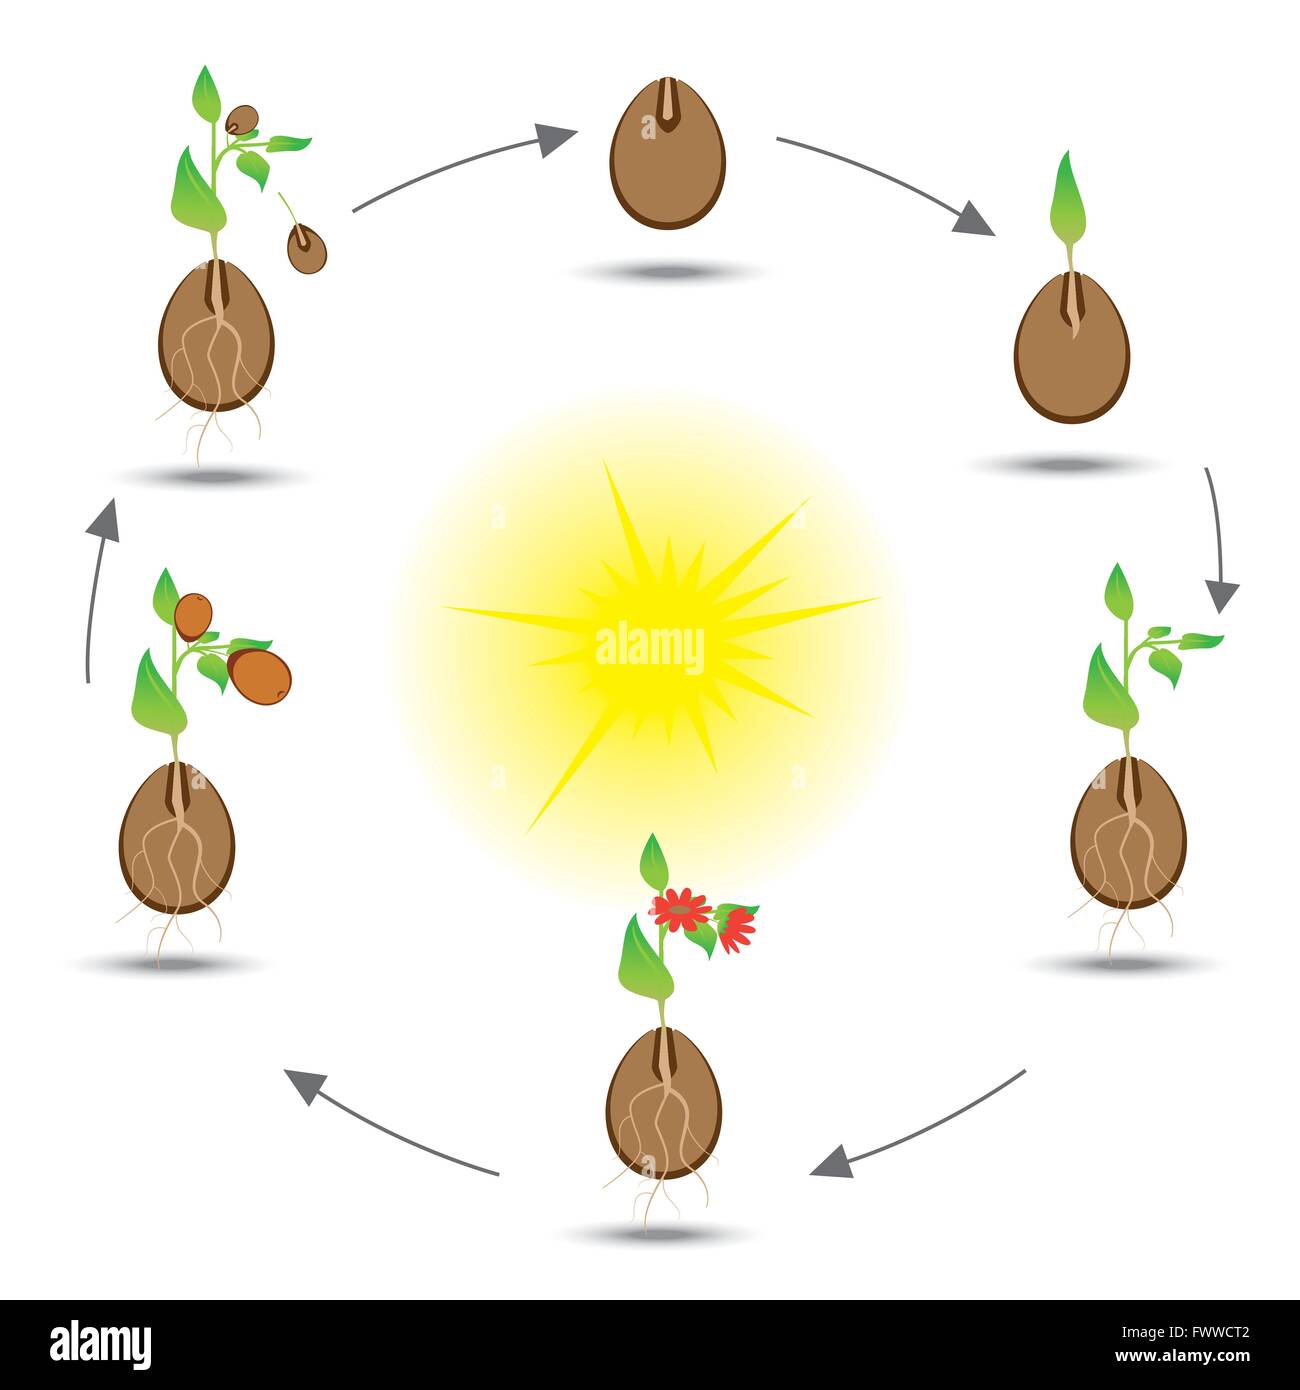 Life cycle of the plant. Stock Vector